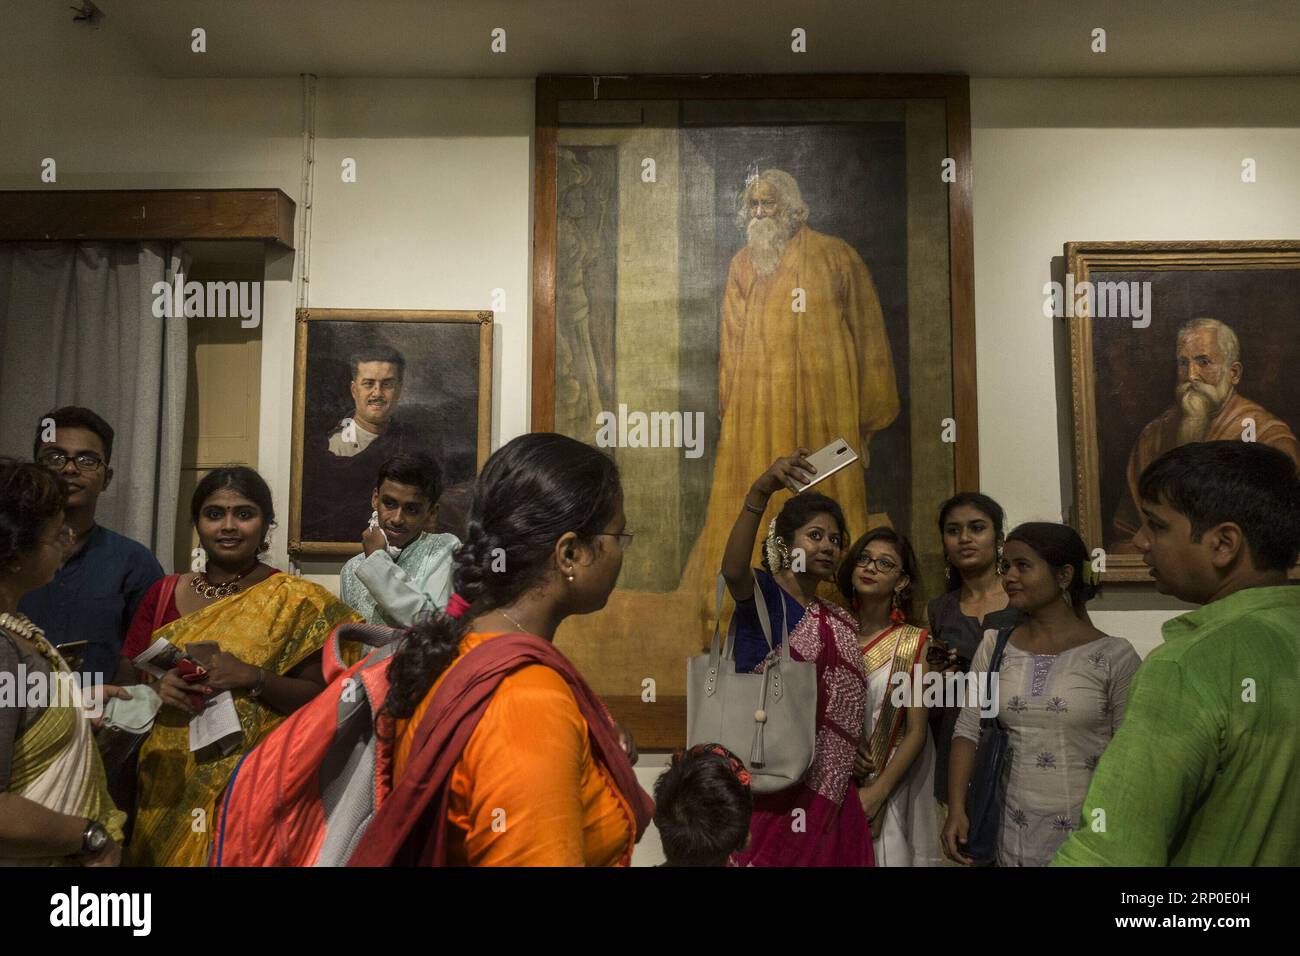 (180509) -- KOLKATA, May 9, 2018 -- Indian people visit the museum at Nobel laureate poet Rabindranath Tagore s house during the celebration of his 157th birth anniversary in Kolkata, India on May 9, 2018. Tagore was the first Asian to win Nobel Prize for his collection of poems Geetanjali in 1913. ) (zjl) INDIA-KOLKATA-TAGORE-BIRTH ANNIVERSARY TumpaxMondal PUBLICATIONxNOTxINxCHN Stock Photo